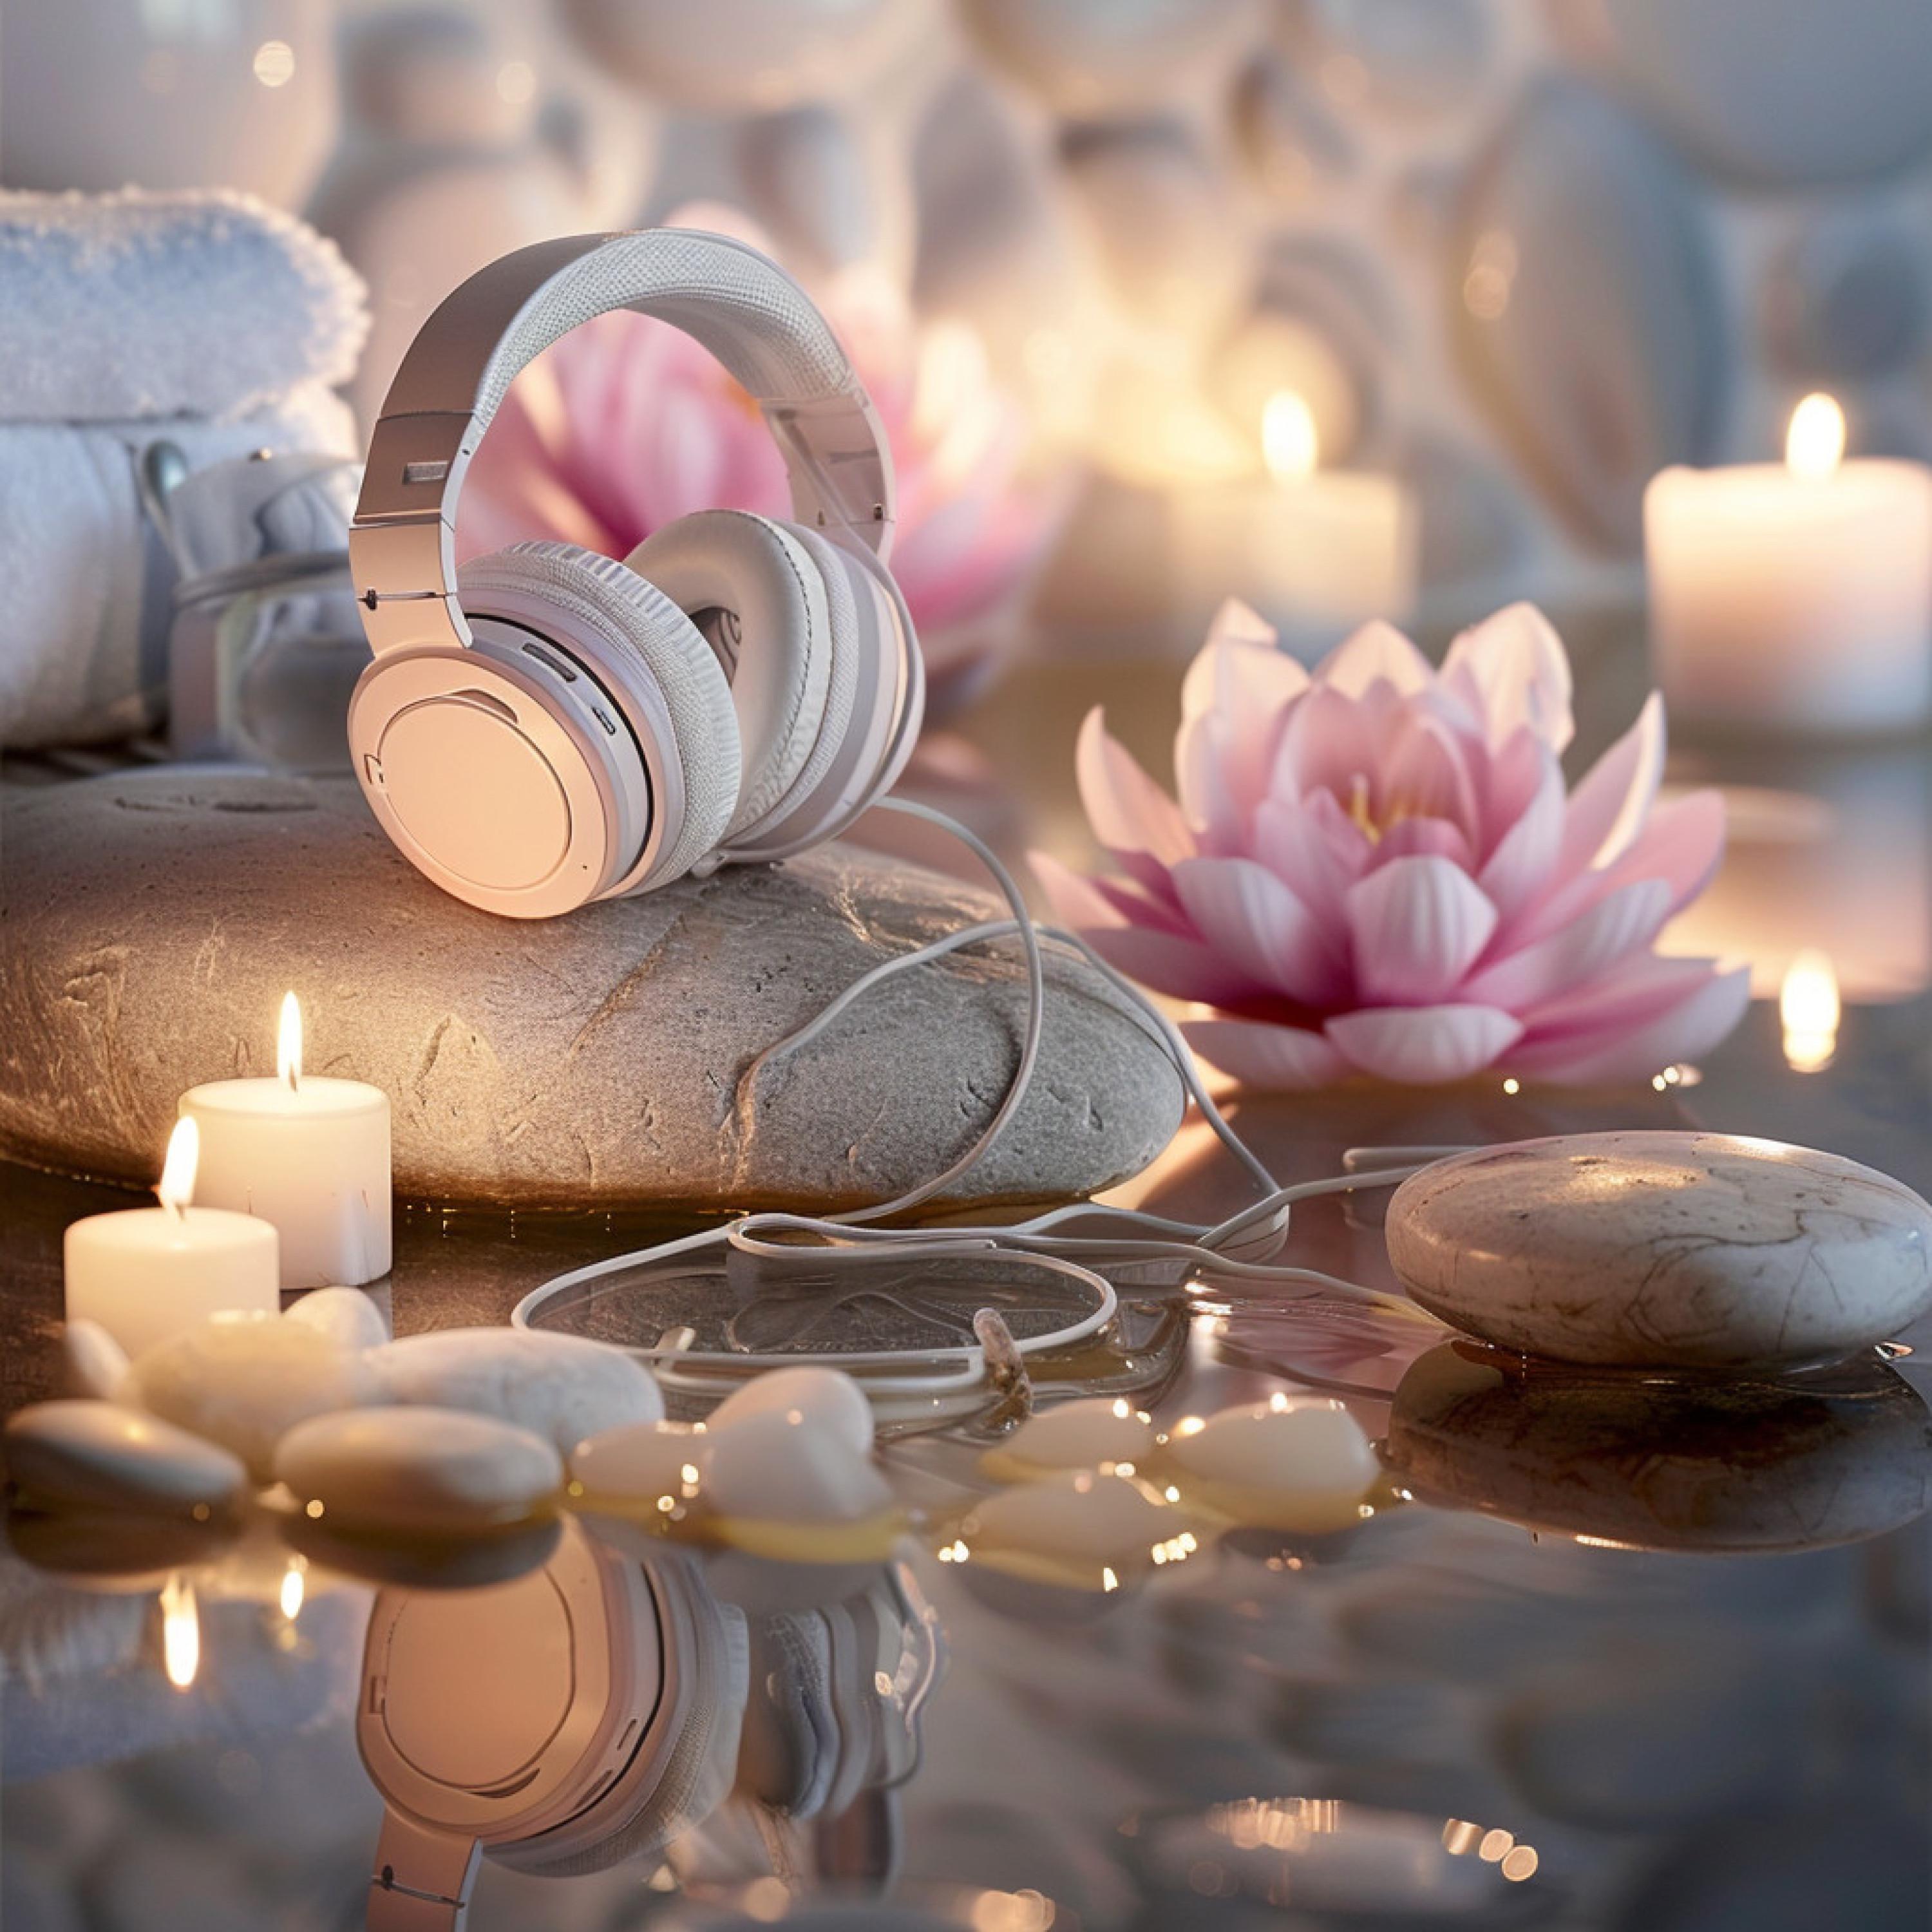 Unforgettable Paradise SPA Music Academy - Calm Healing Notes